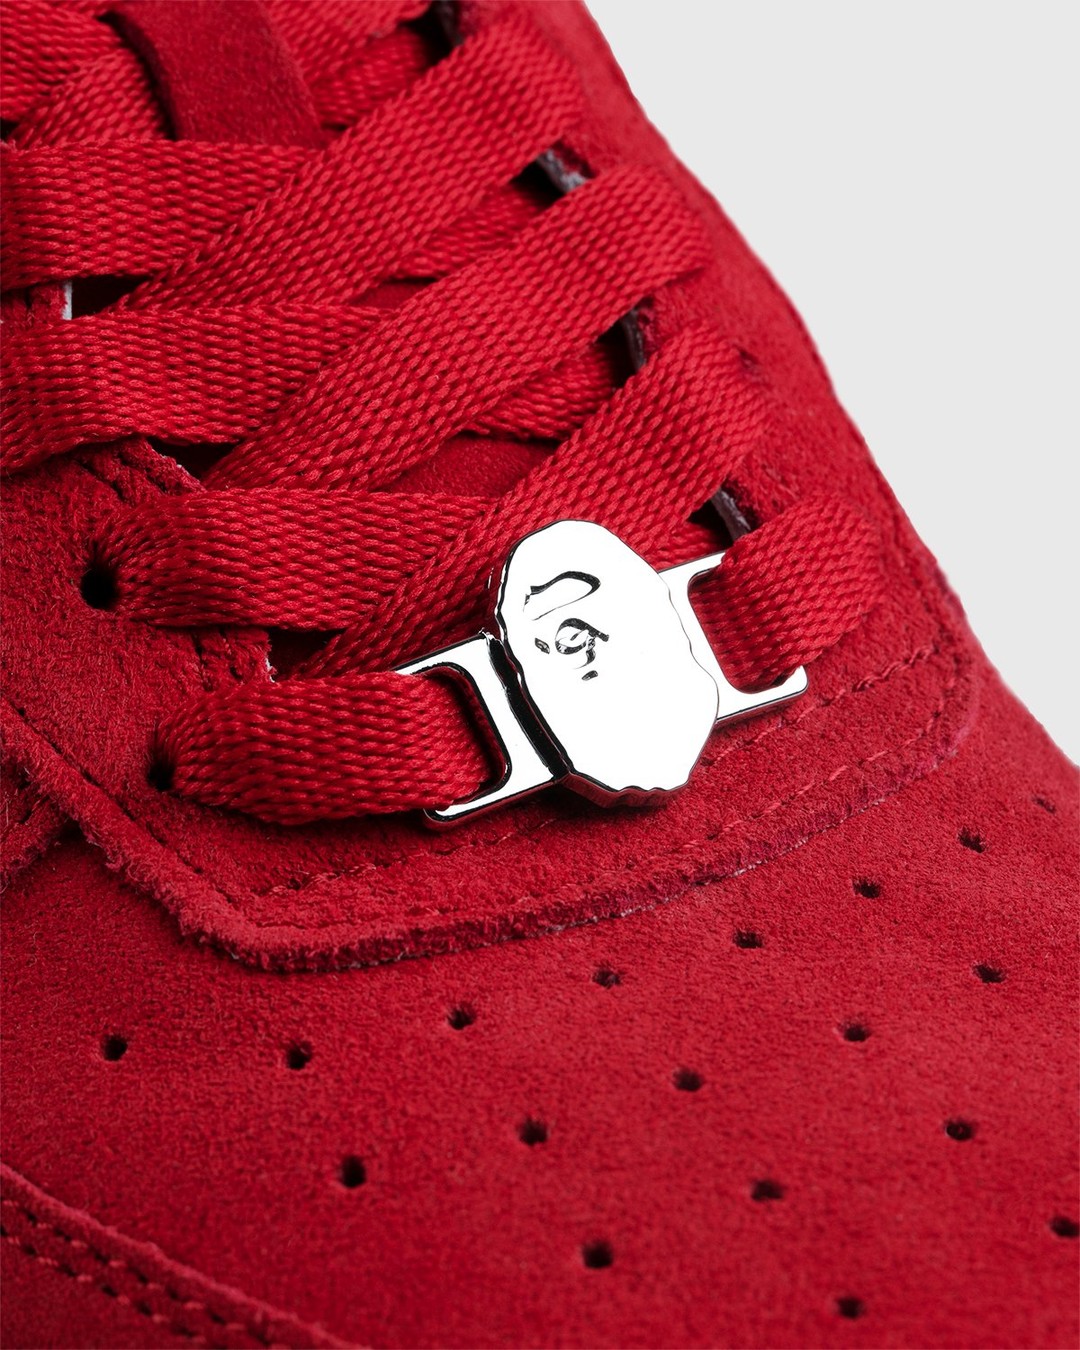 BAPE x Highsnobiety – BAPE STA Red - Low Top Sneakers - Red - Image 6